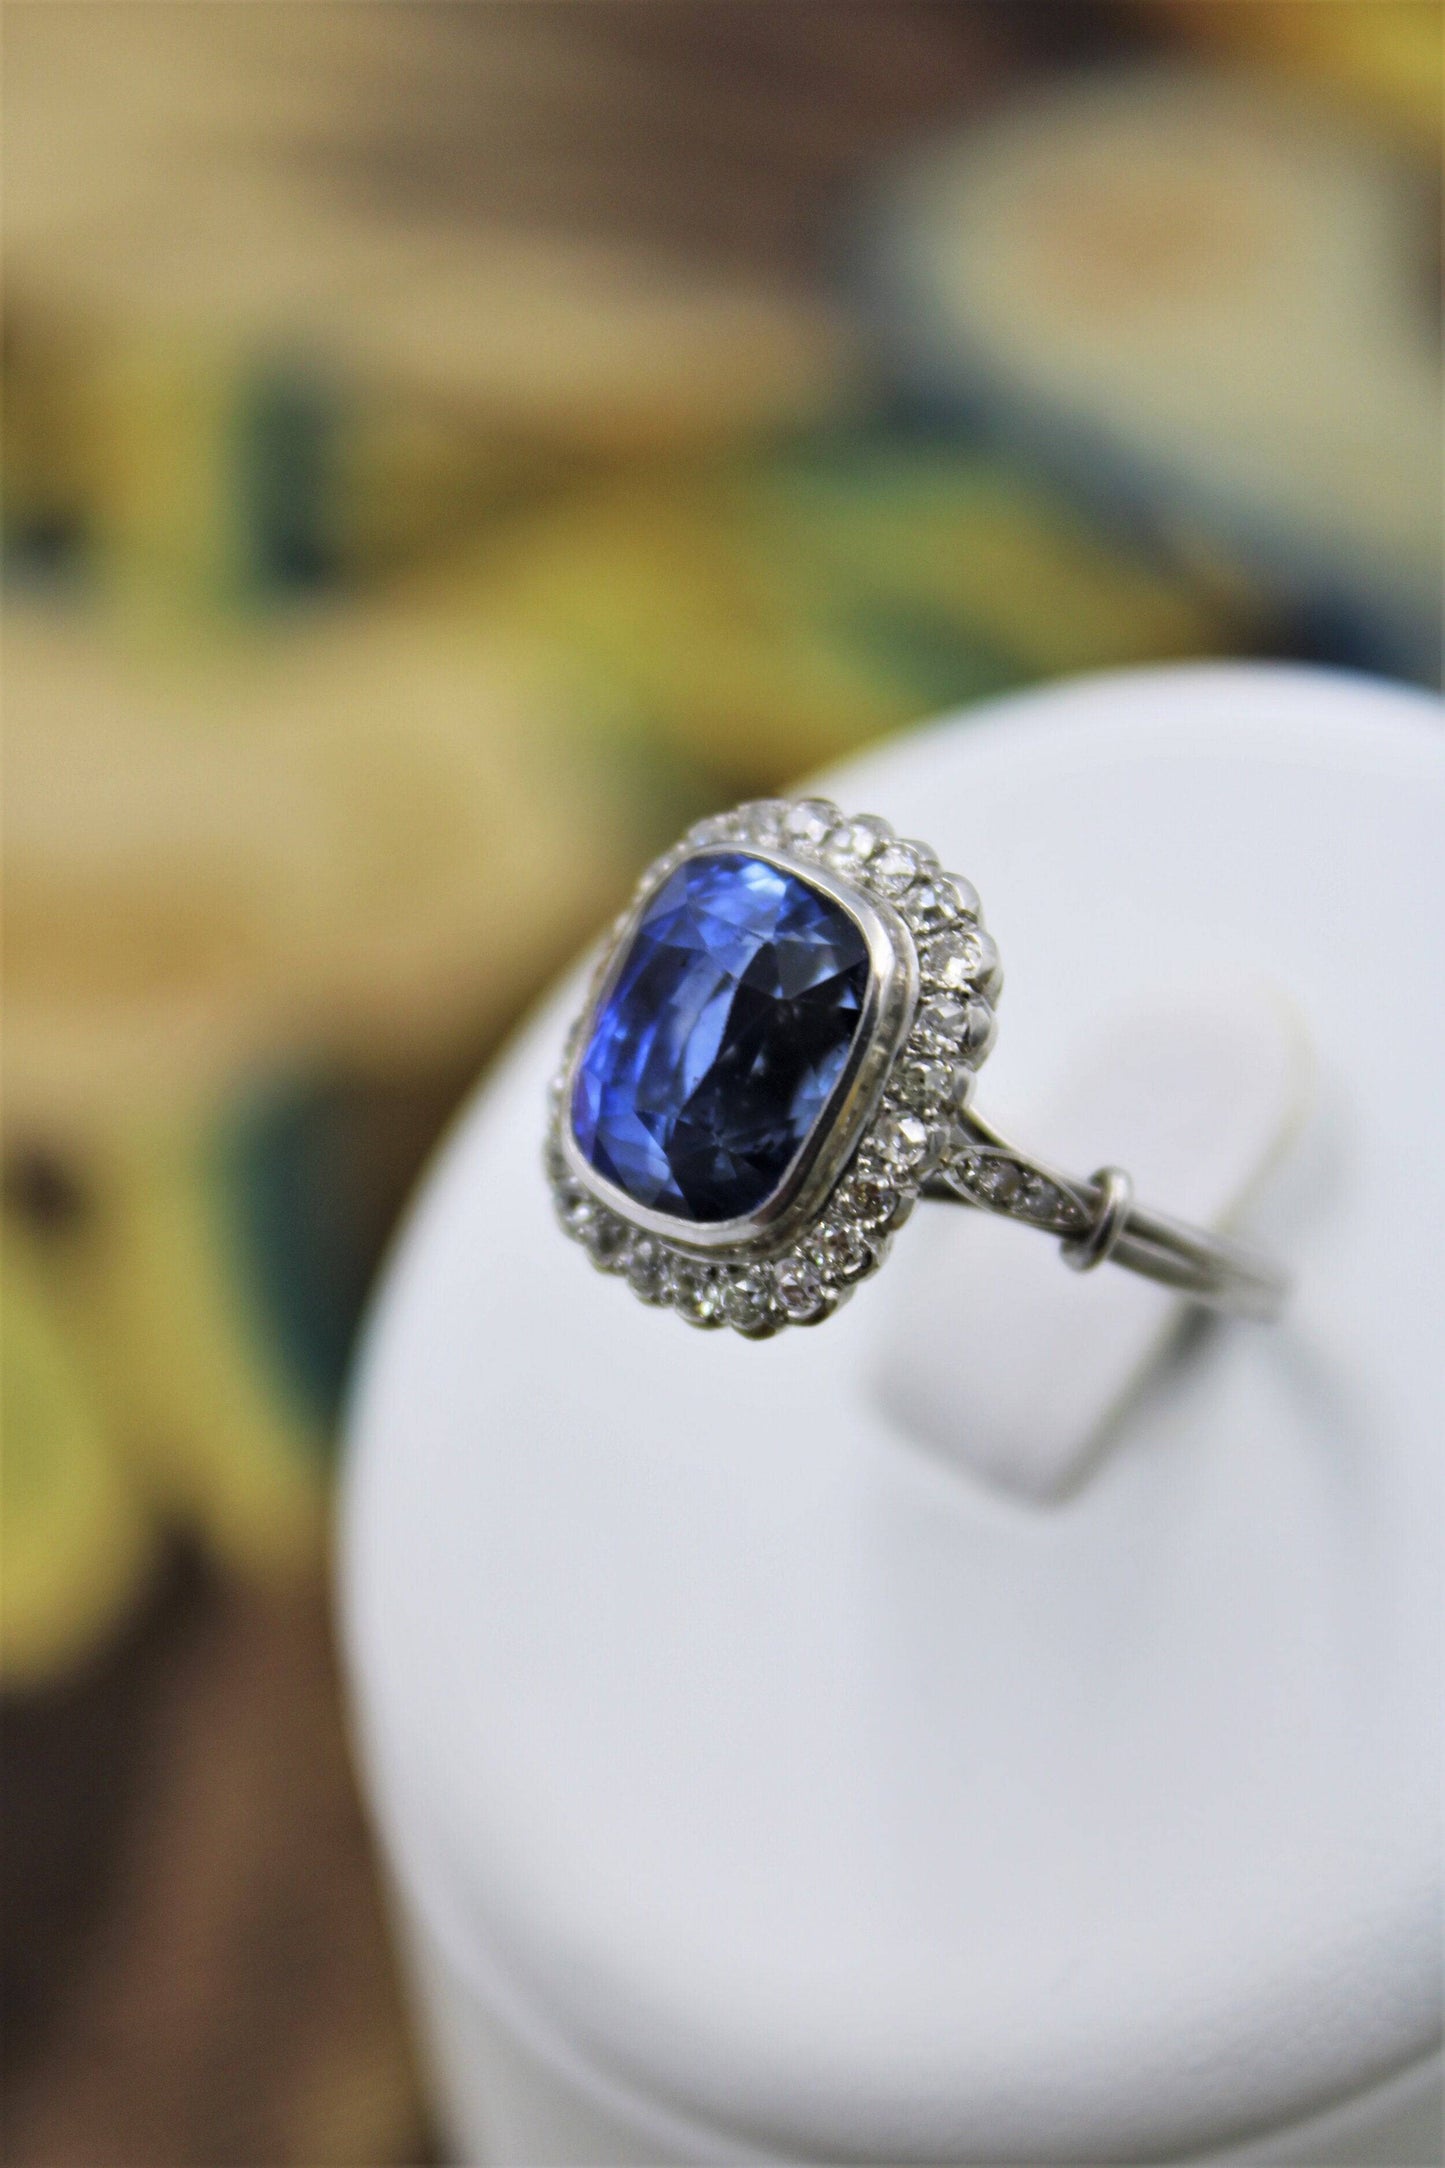 An exquisite 8.10ct Natural Untreated Ceylon Sapphire and Diamond Cluster Ring mounted in Platinum, English, Circa 1925 - Robin Haydock Antiques